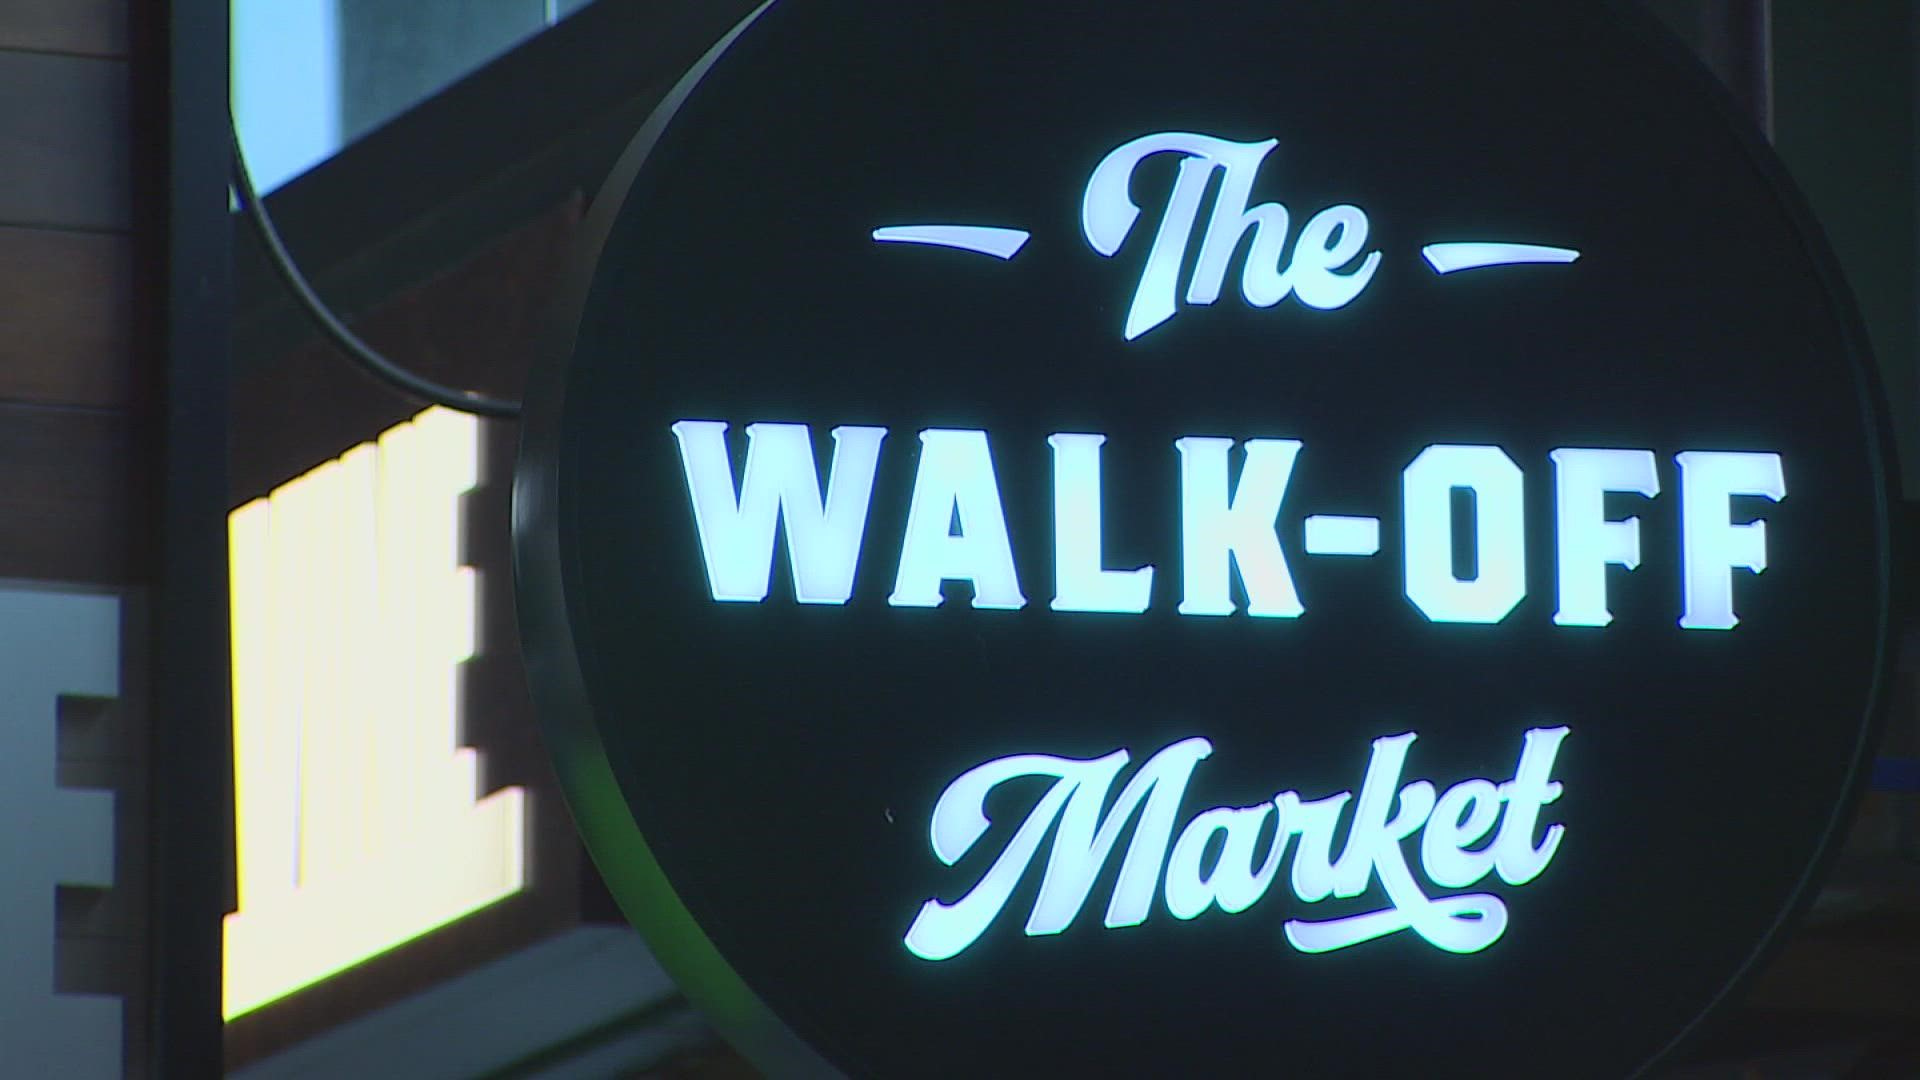 The new “Walk-Off Market” at T-Mobile park allows fans to grab some grub during a Seattle Mariners game without having to wait in line to pay.